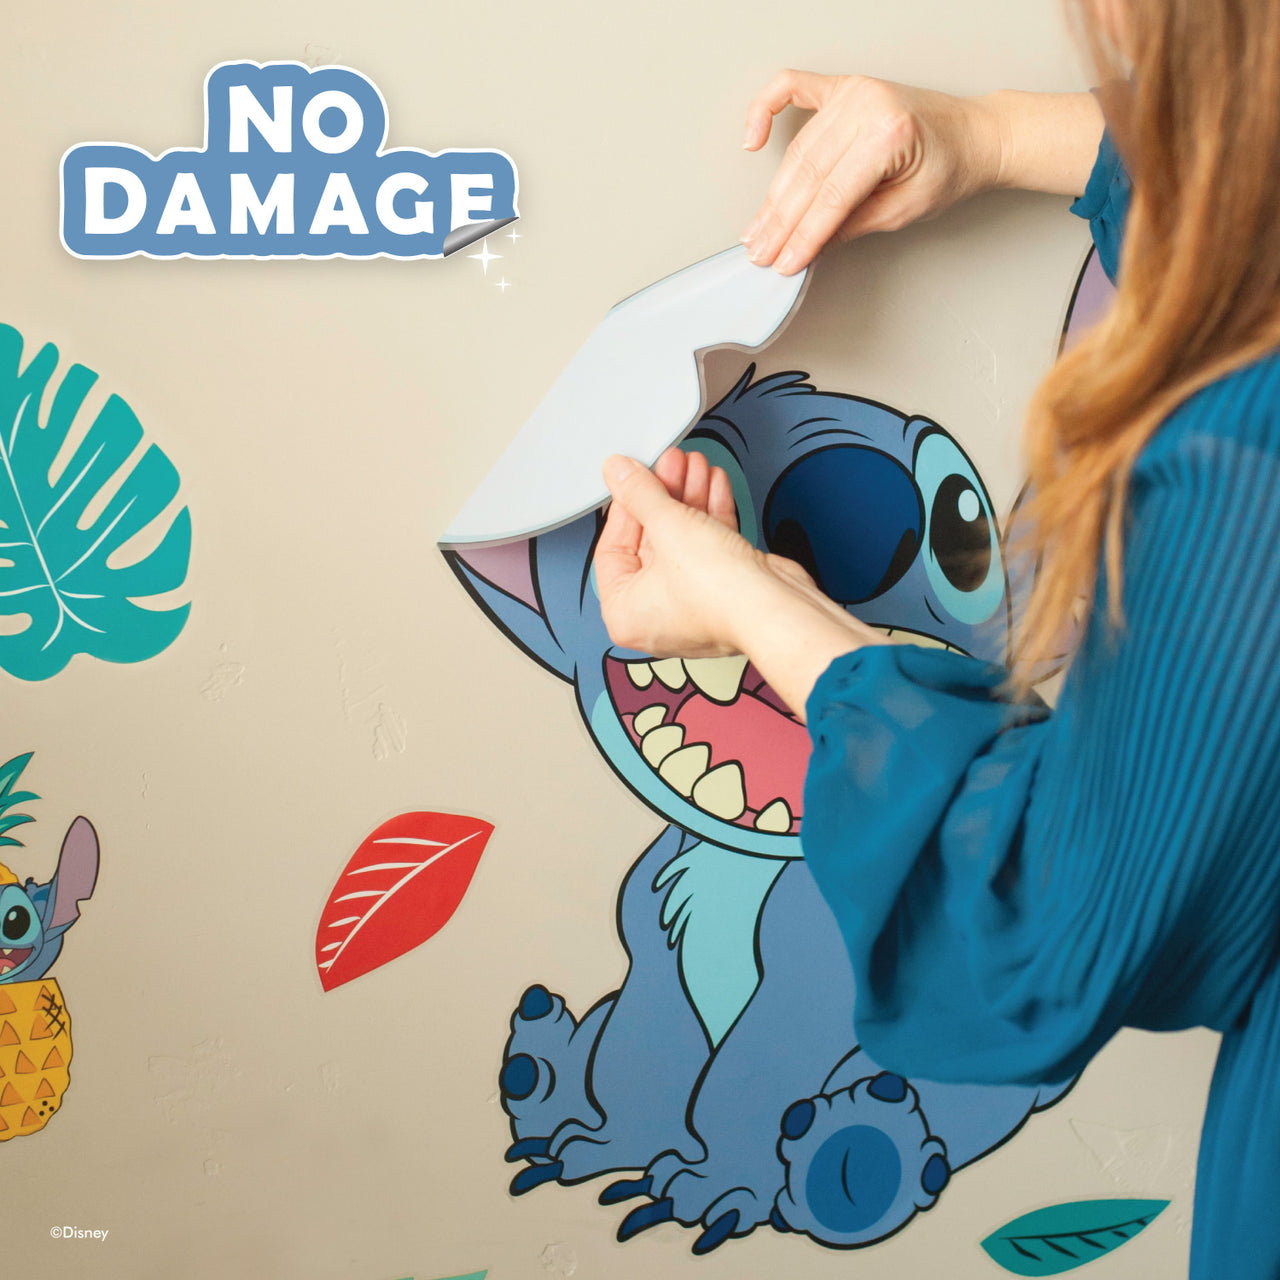  Stitch Wall Decals Realistic Stereoscopic Self